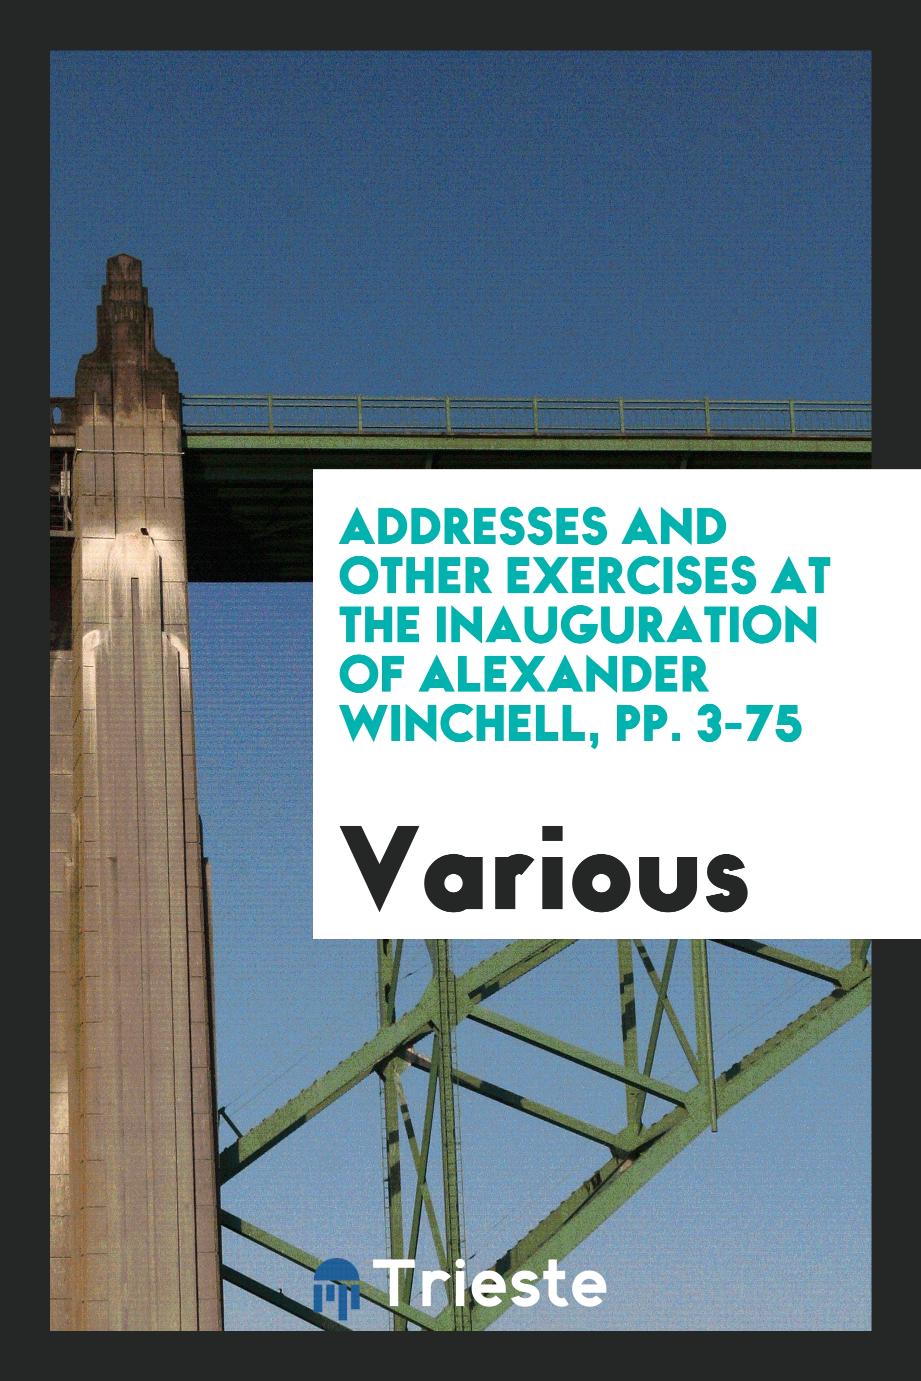 Addresses and Other Exercises at the Inauguration of Alexander Winchell, pp. 3-75